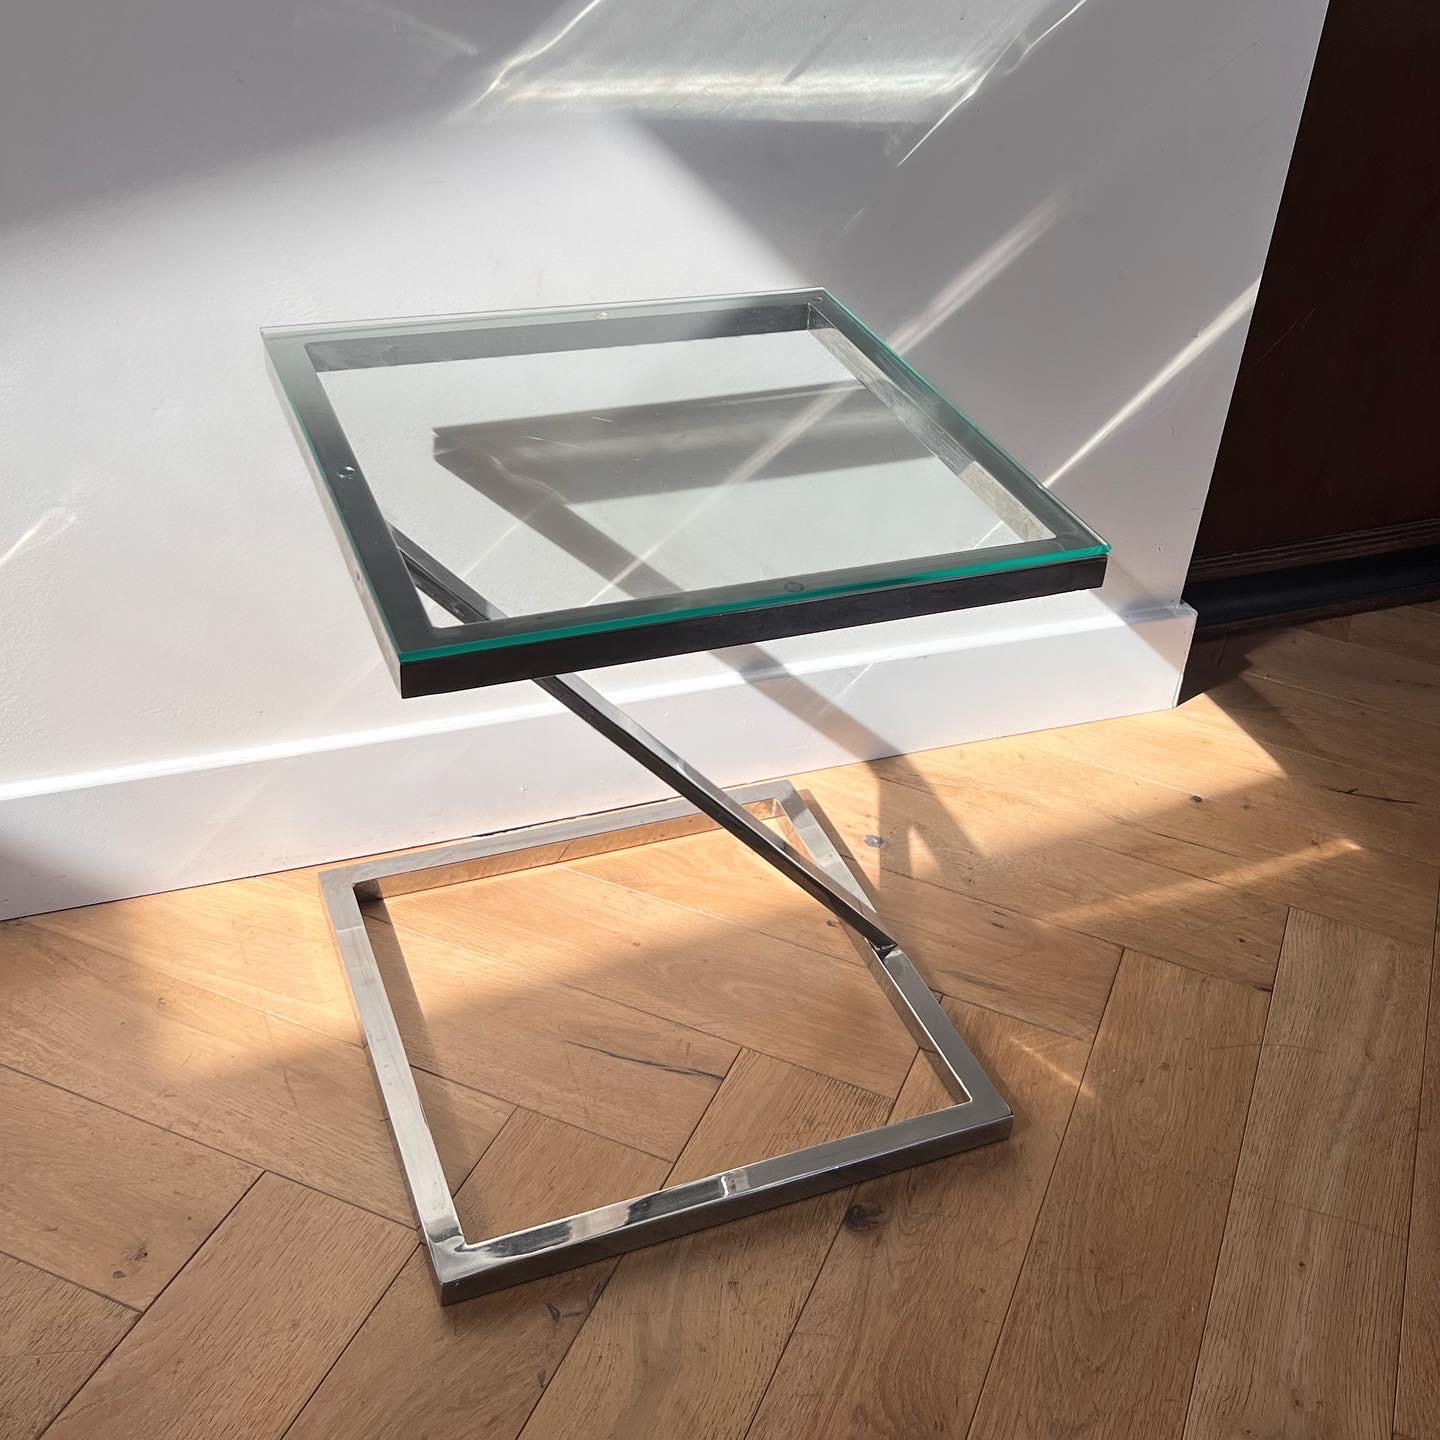 A Mid-Century Modern chrome side table with glass top, circa 1970. Featuring a very unique zig-zag shape, this table combines mcm, space-age, and postmodern sensibilities. Signs of wear are minimal but consistent with age and use. Pick up in central